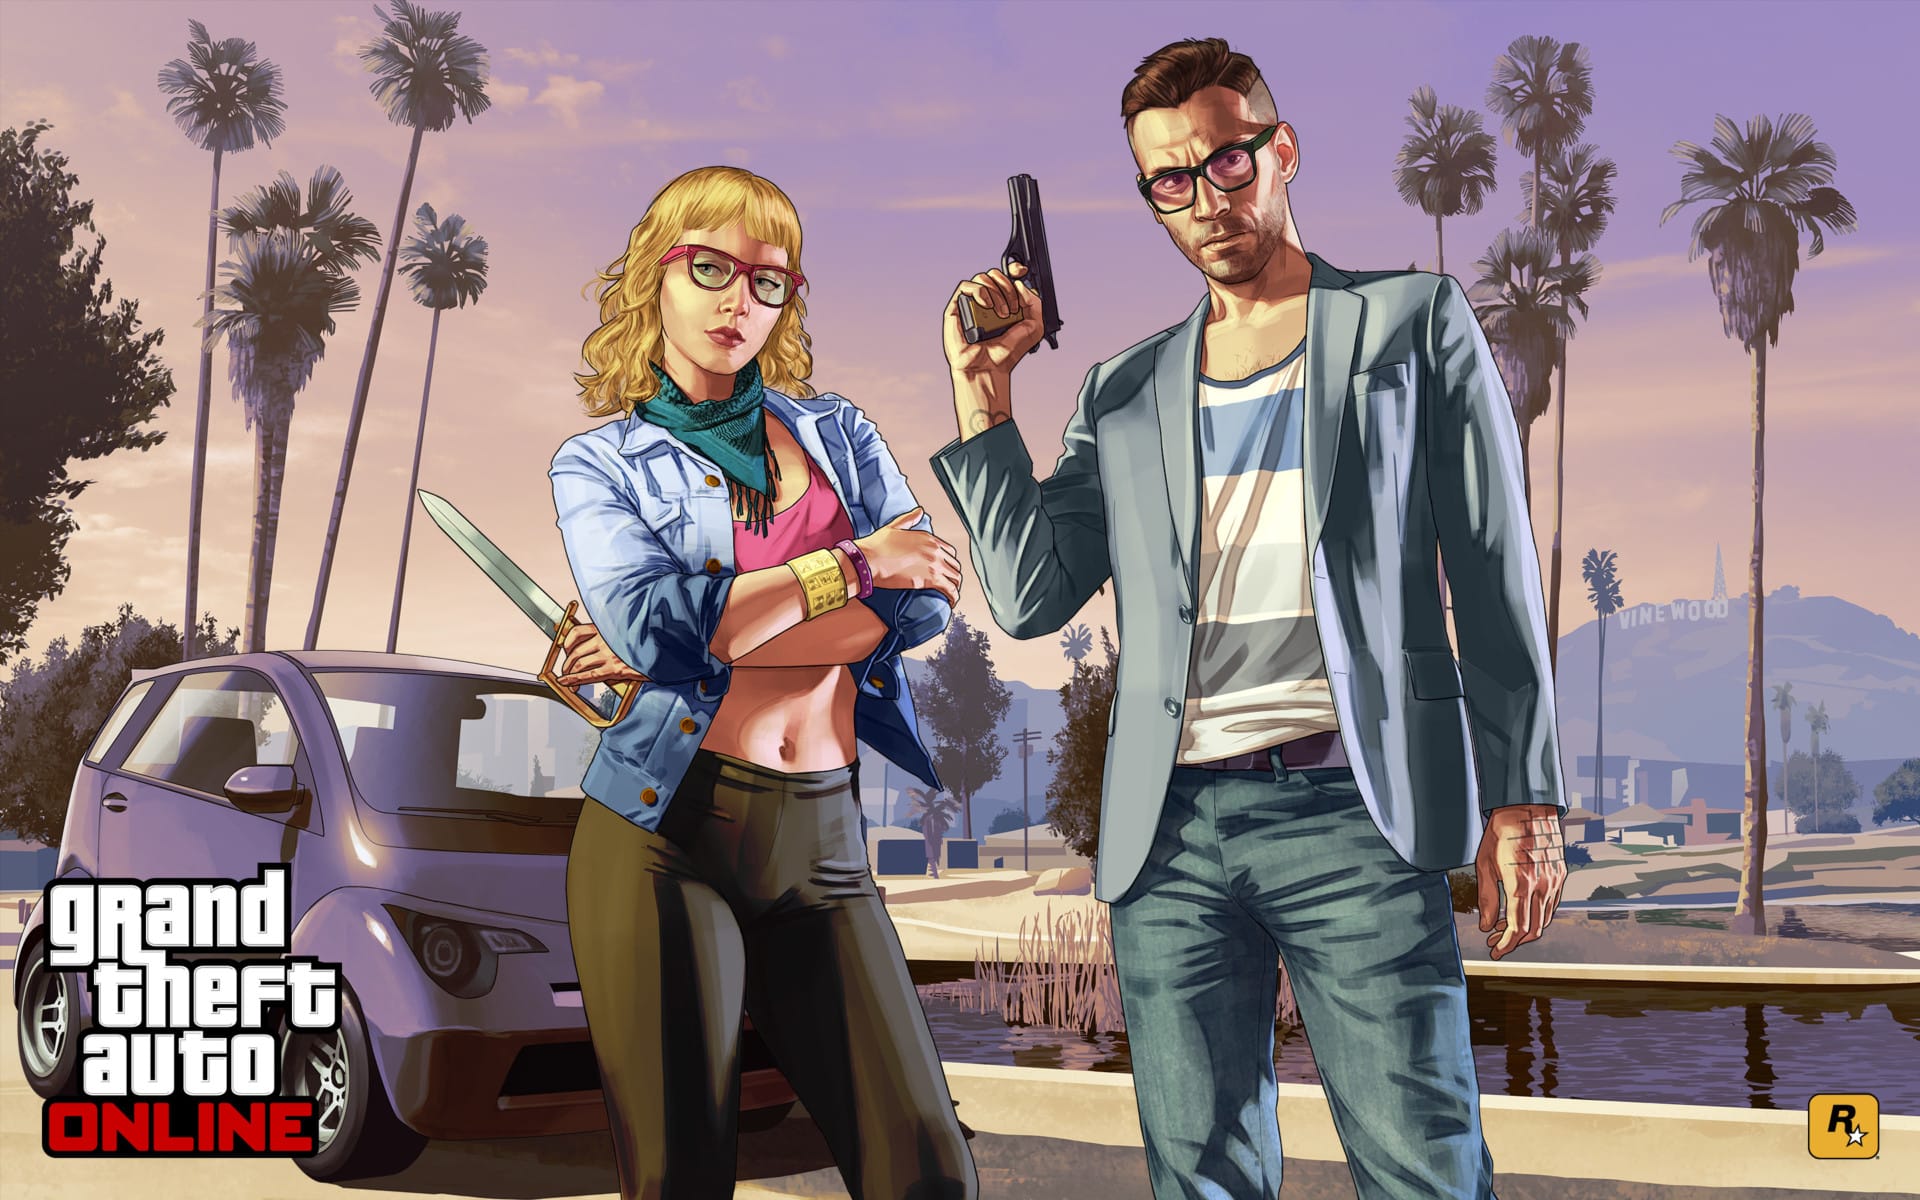 Rockstar Games teases new updates for GTA Online ahead of 10th